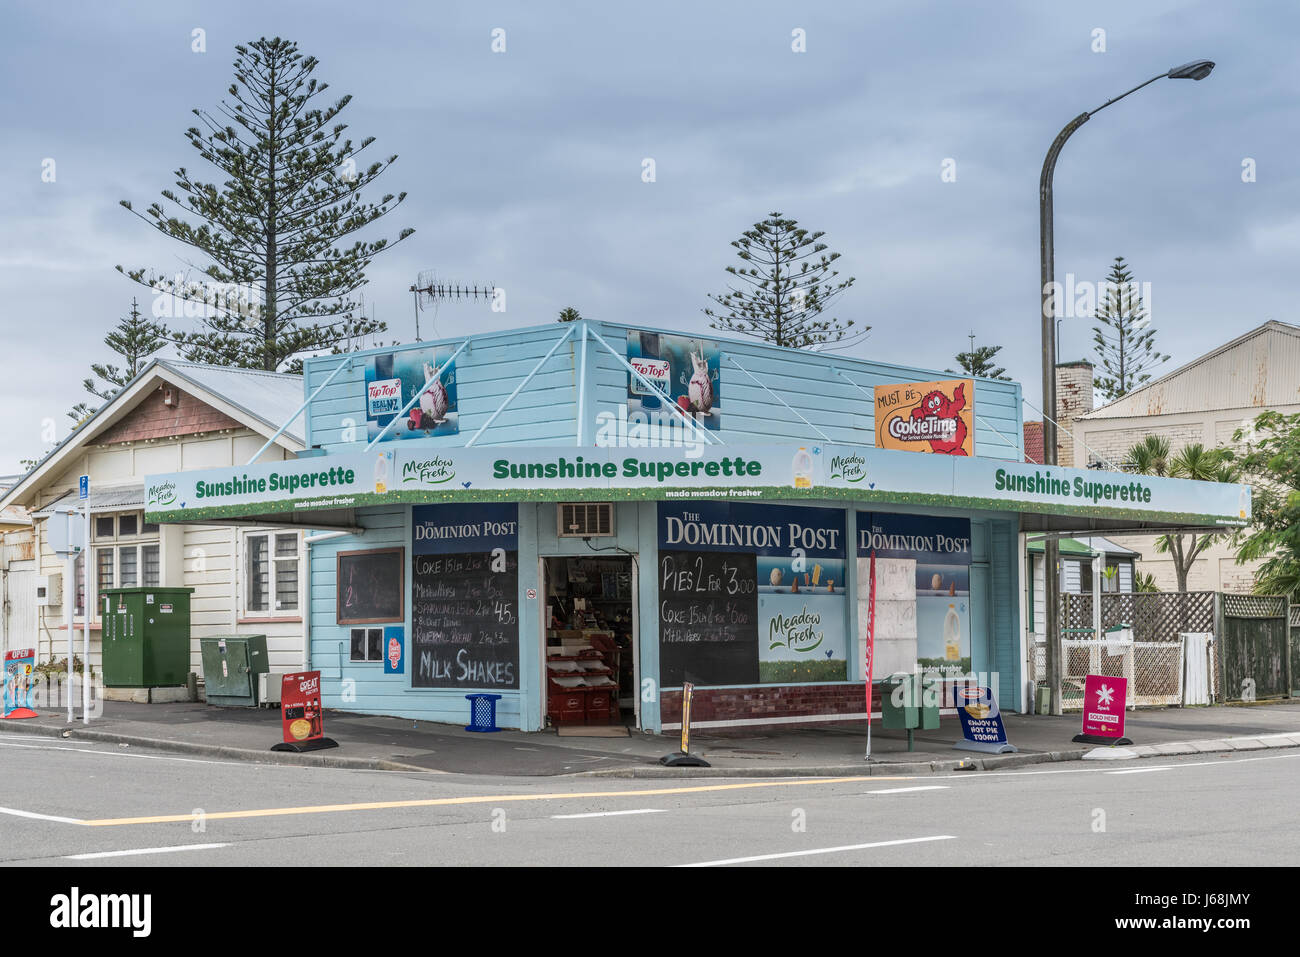 Napier, New Zealand - March 9, 2017: Sunshine Superette is a corner store selling groceries, newspapers and basic household products. Light blue paint Stock Photo